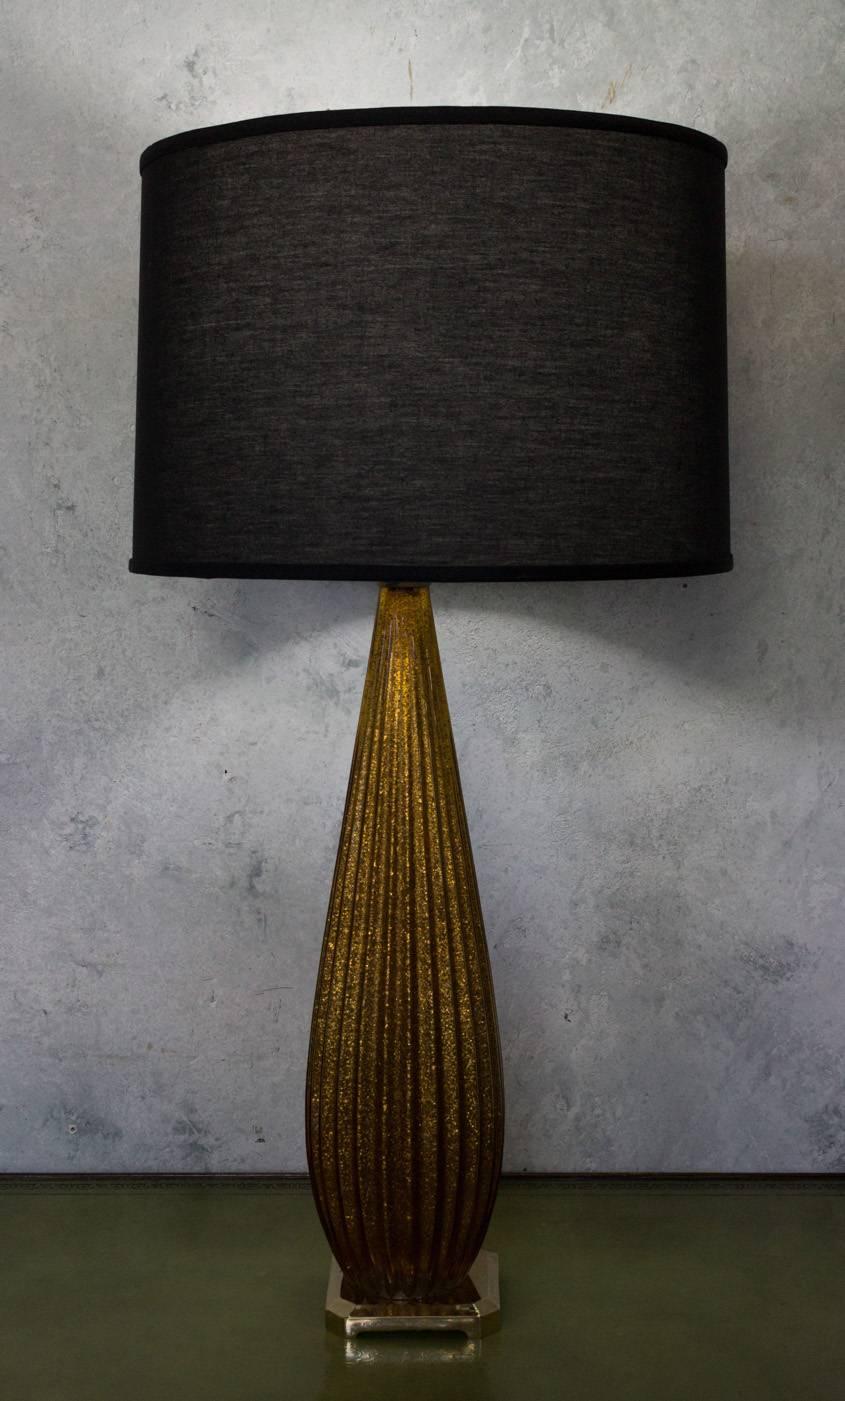 A stunning tall Italian Murano glass lamp with gold flecks inside the ribbed glass. This Italian Murano glass lamp is truly exquisite. The ribbed glass design of the lamp is unique and eye-catching, while the gold flecks inside the glass add a touch